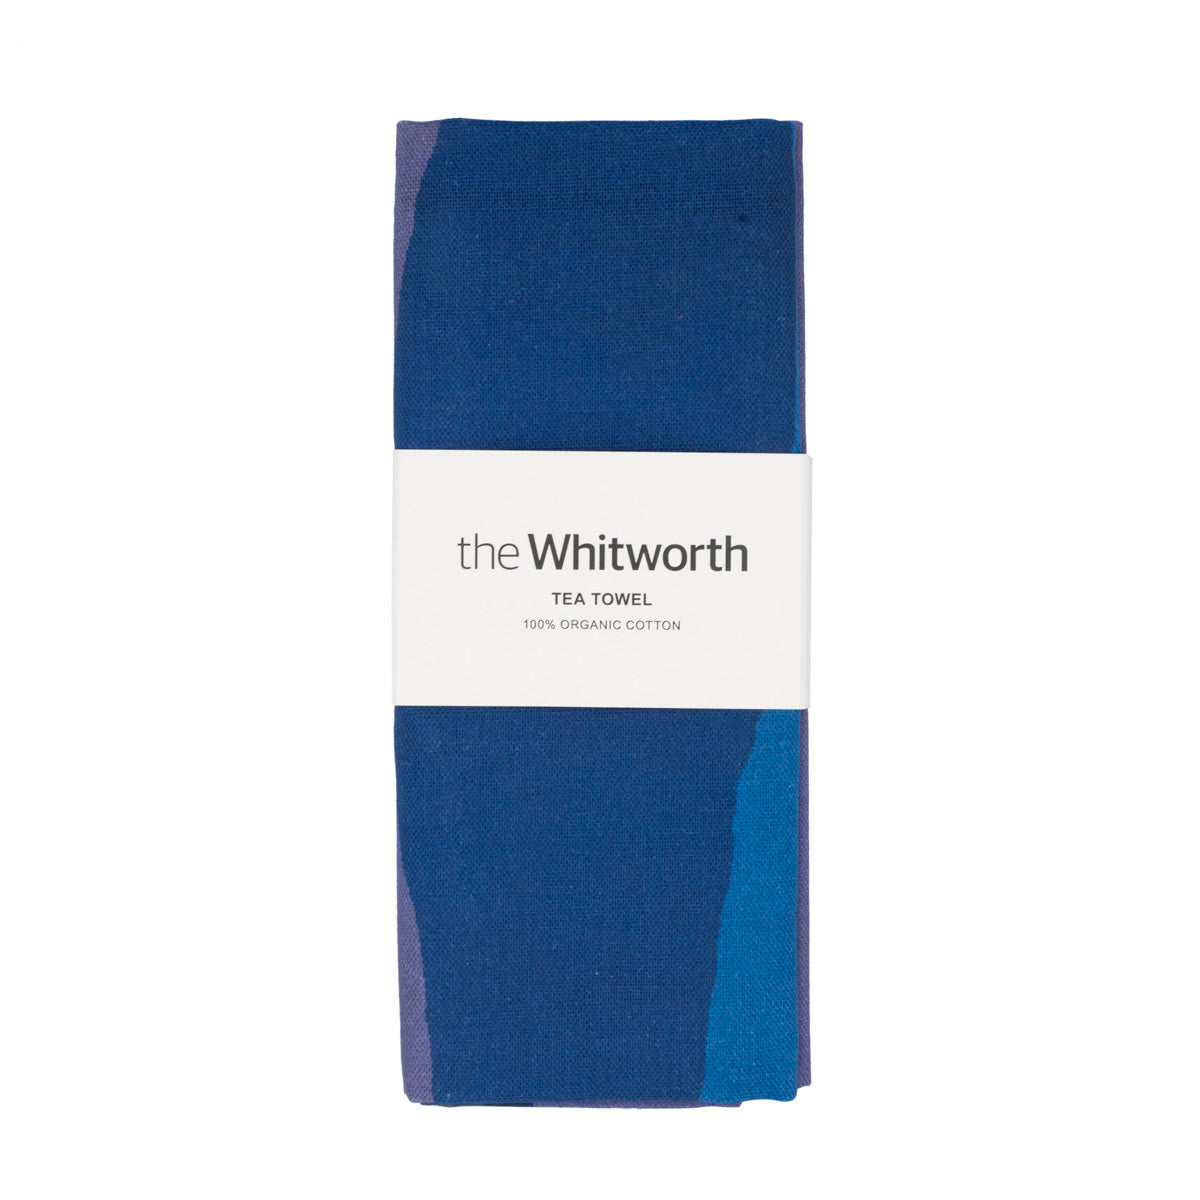 Blue tea towel folded with a Whitworth branded belly band